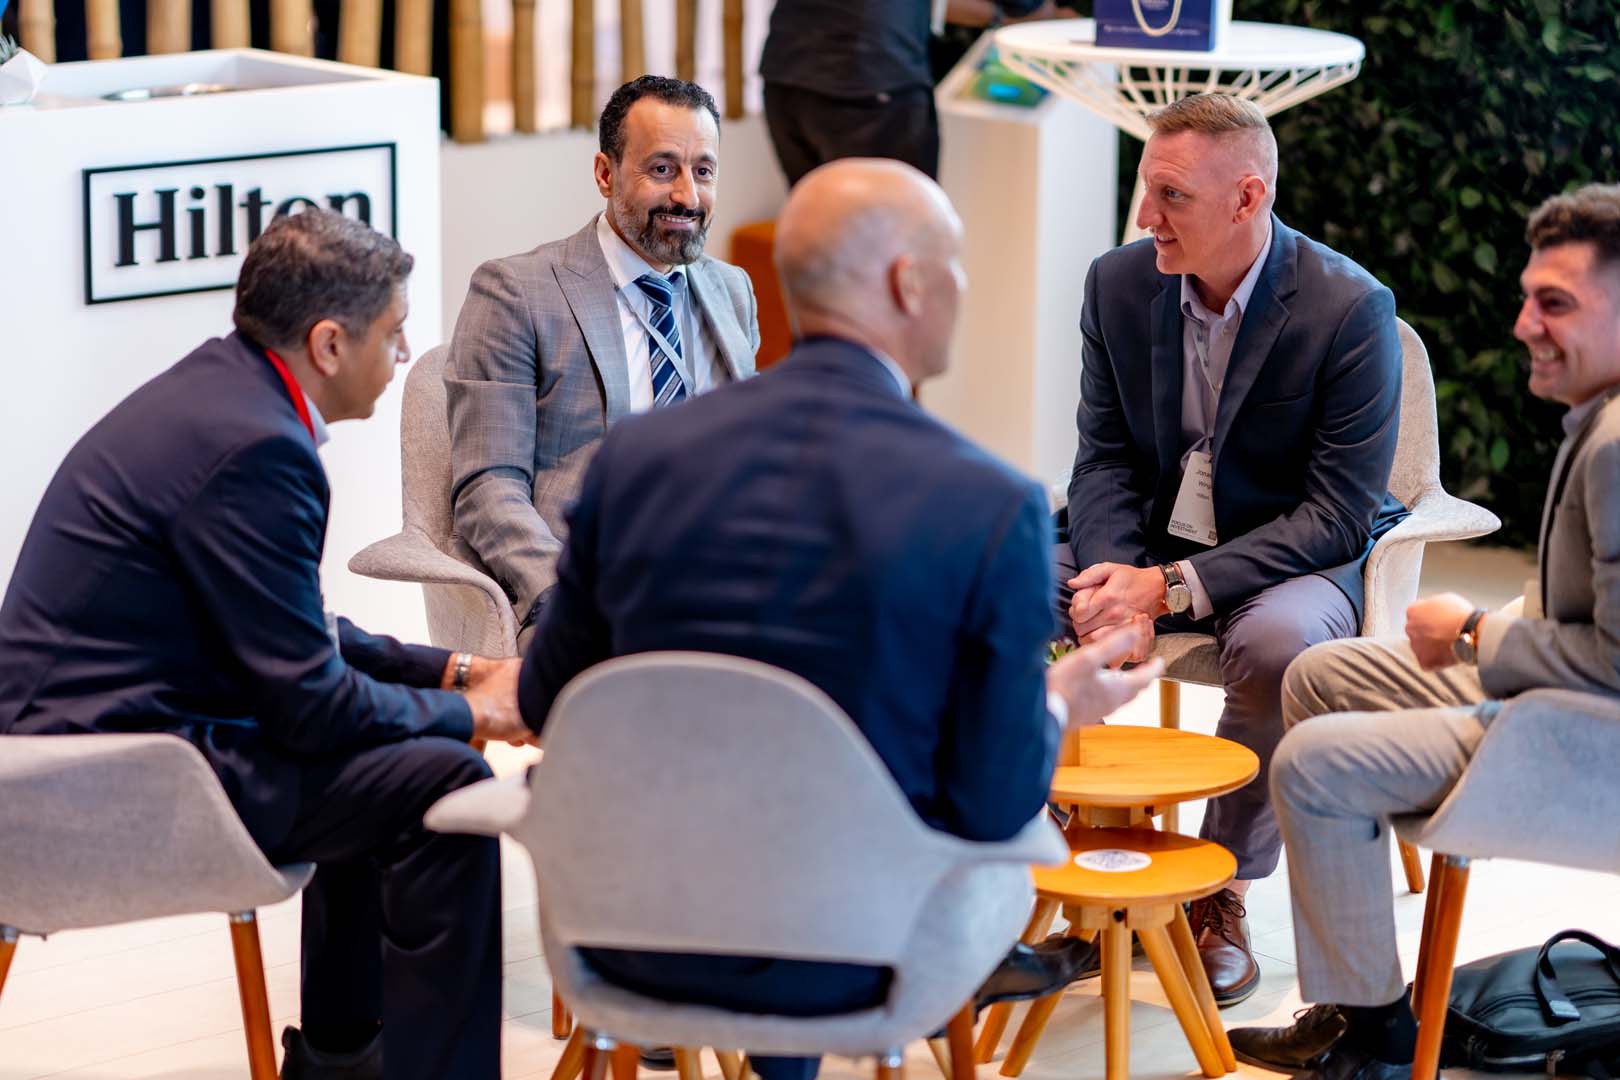 Snapshots from the recent attendance at the Future Hospitality Summit event hosted at the Hilton Abu Dhabi Yas Island4